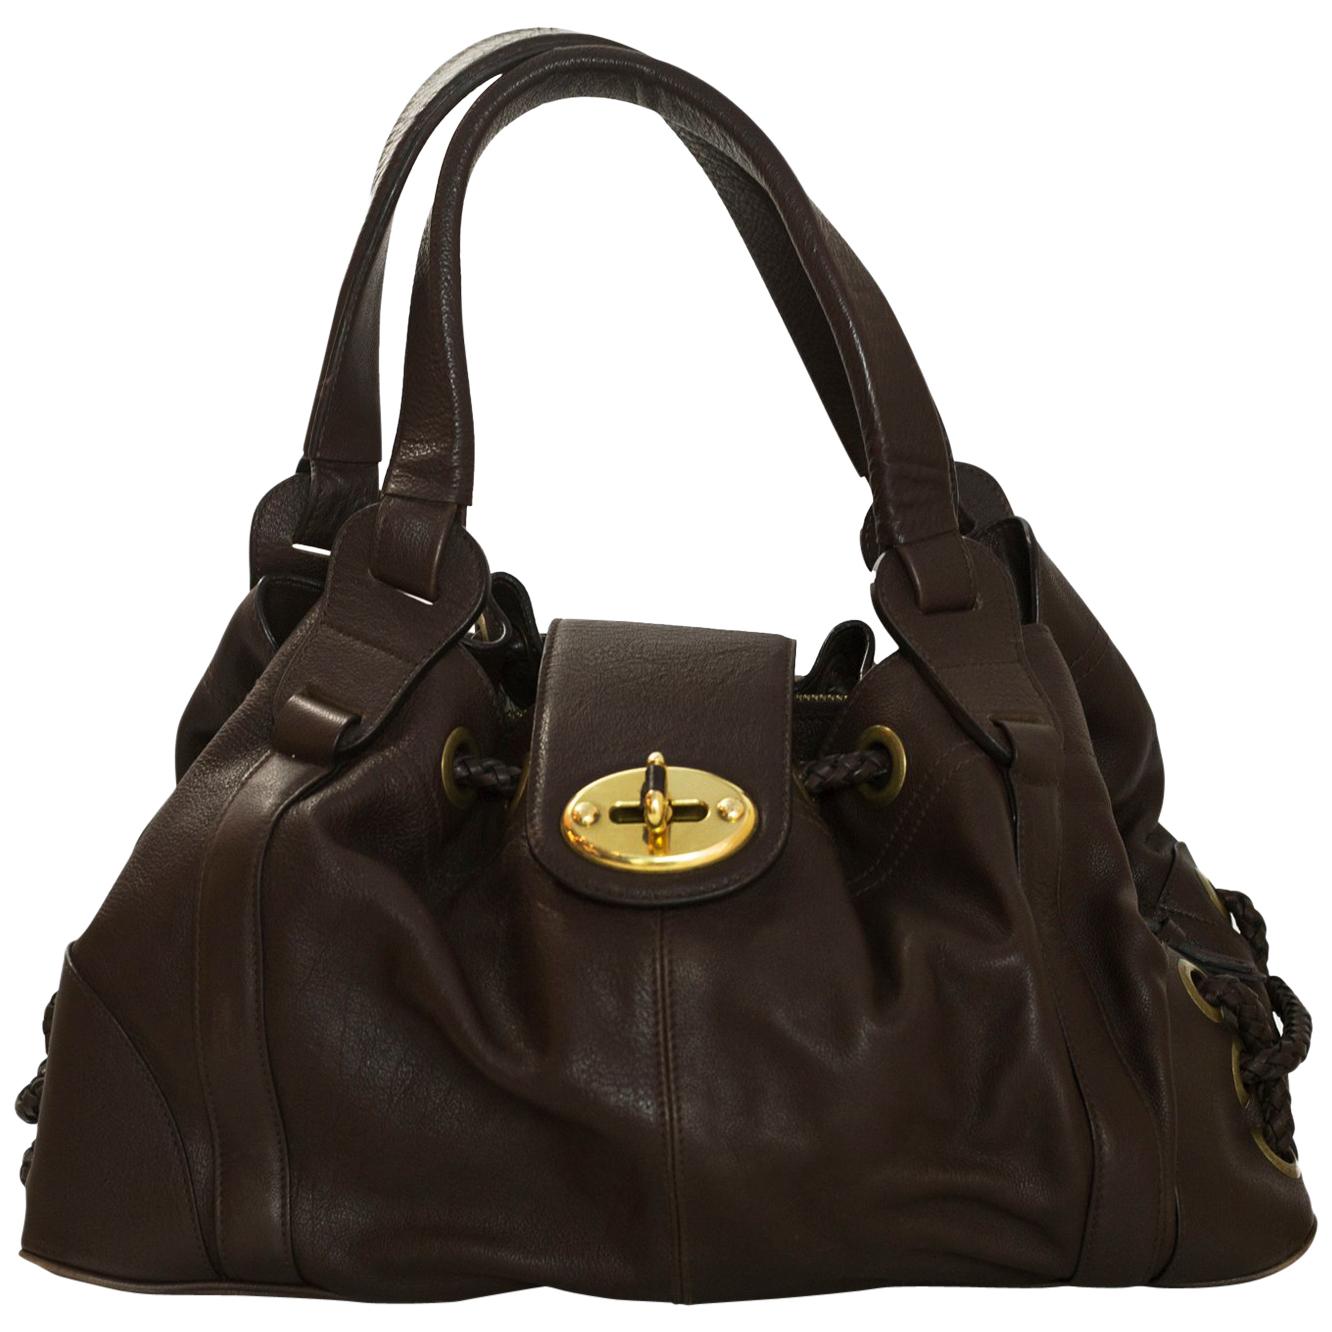 Mulberry Brown Leather Tote Bag with Dust Bag